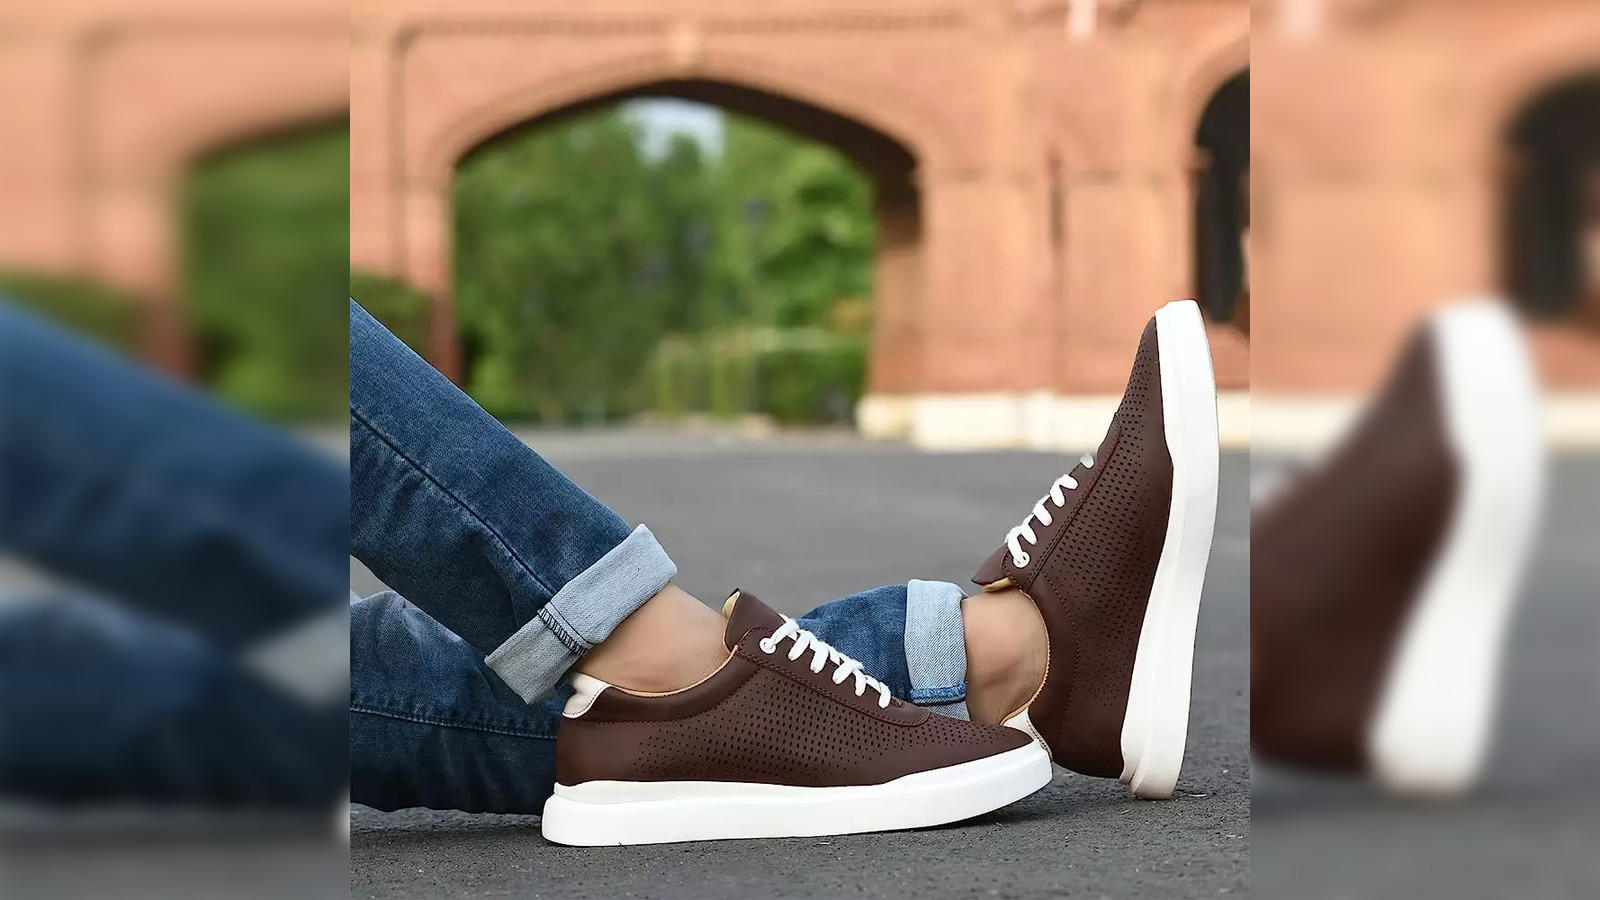 Lace Up Shoes - Sole Mates: Discover Your Perfect Pair of Shoes